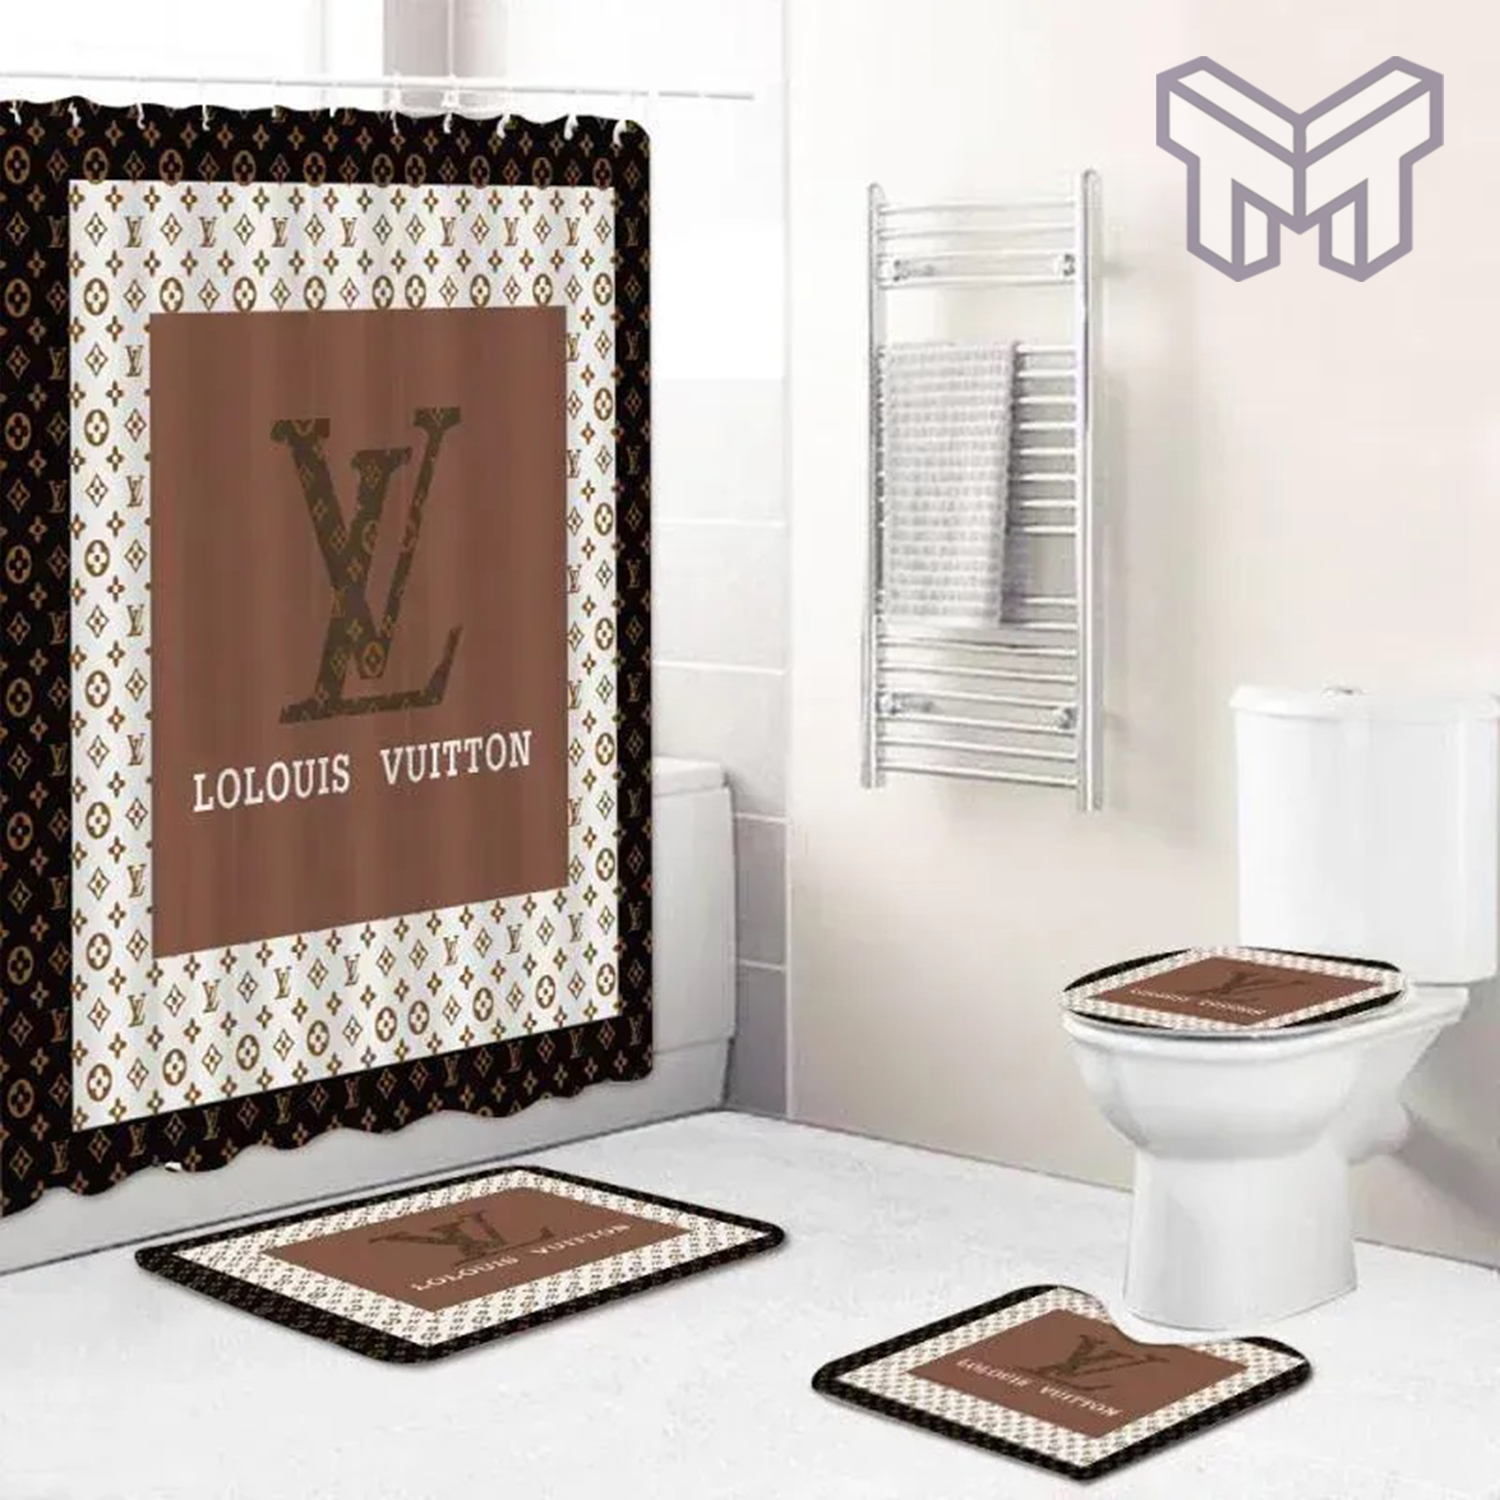 Louis Vuitton Bathroom Set Luxury Shower 3 - Shower Curtain And Rug Toilet  Seat Lid Covers Bathroom Set - Infinite Creativity. Spend Less. Smile More